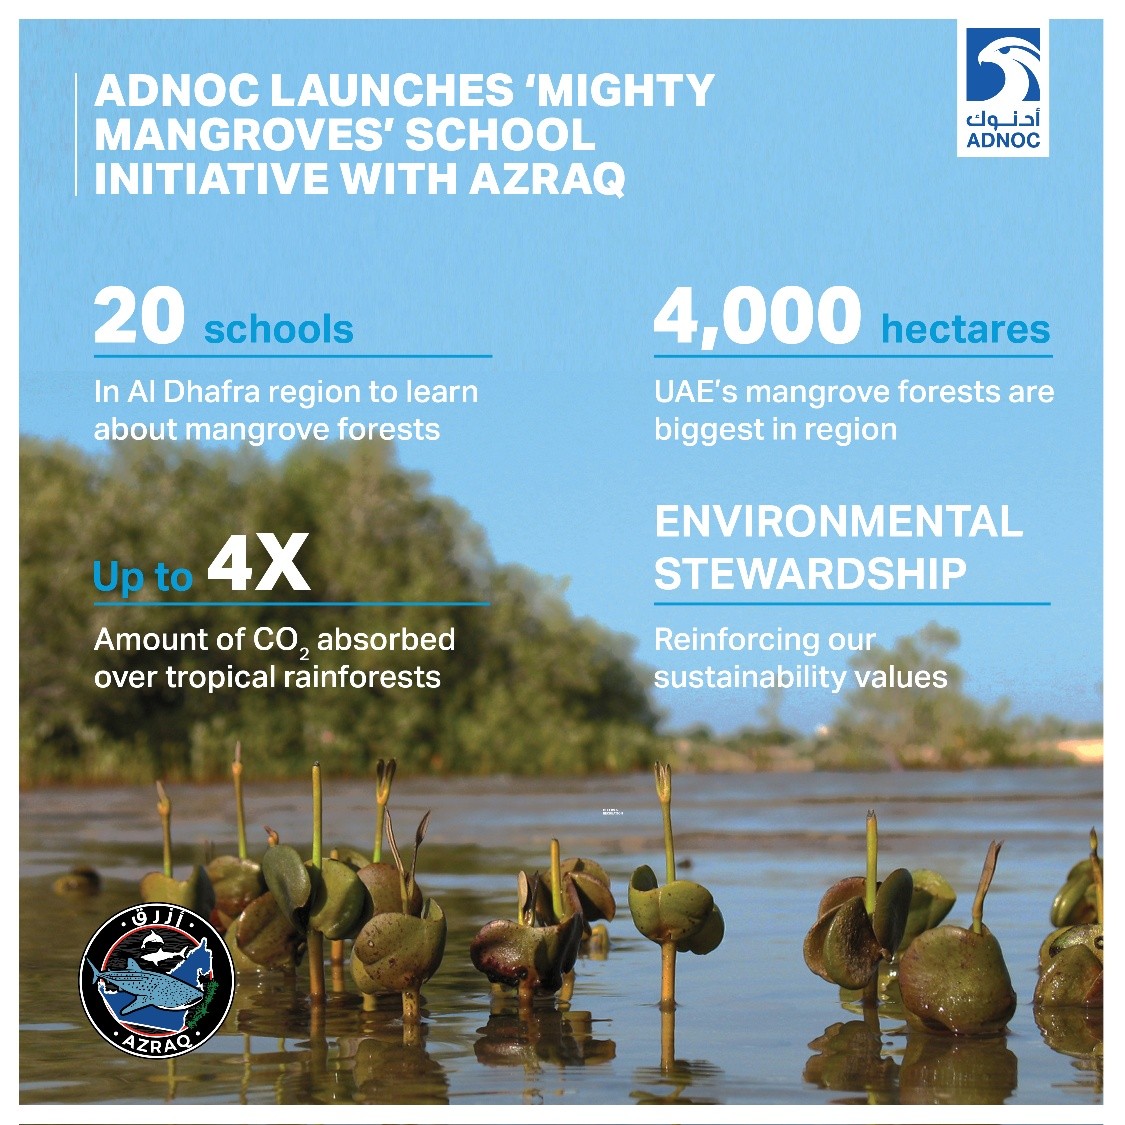 The Abu Dhabi National Oil Company (ADNOC)  launches ‘Mighty Mangroves’ school initiative with AZRAQ